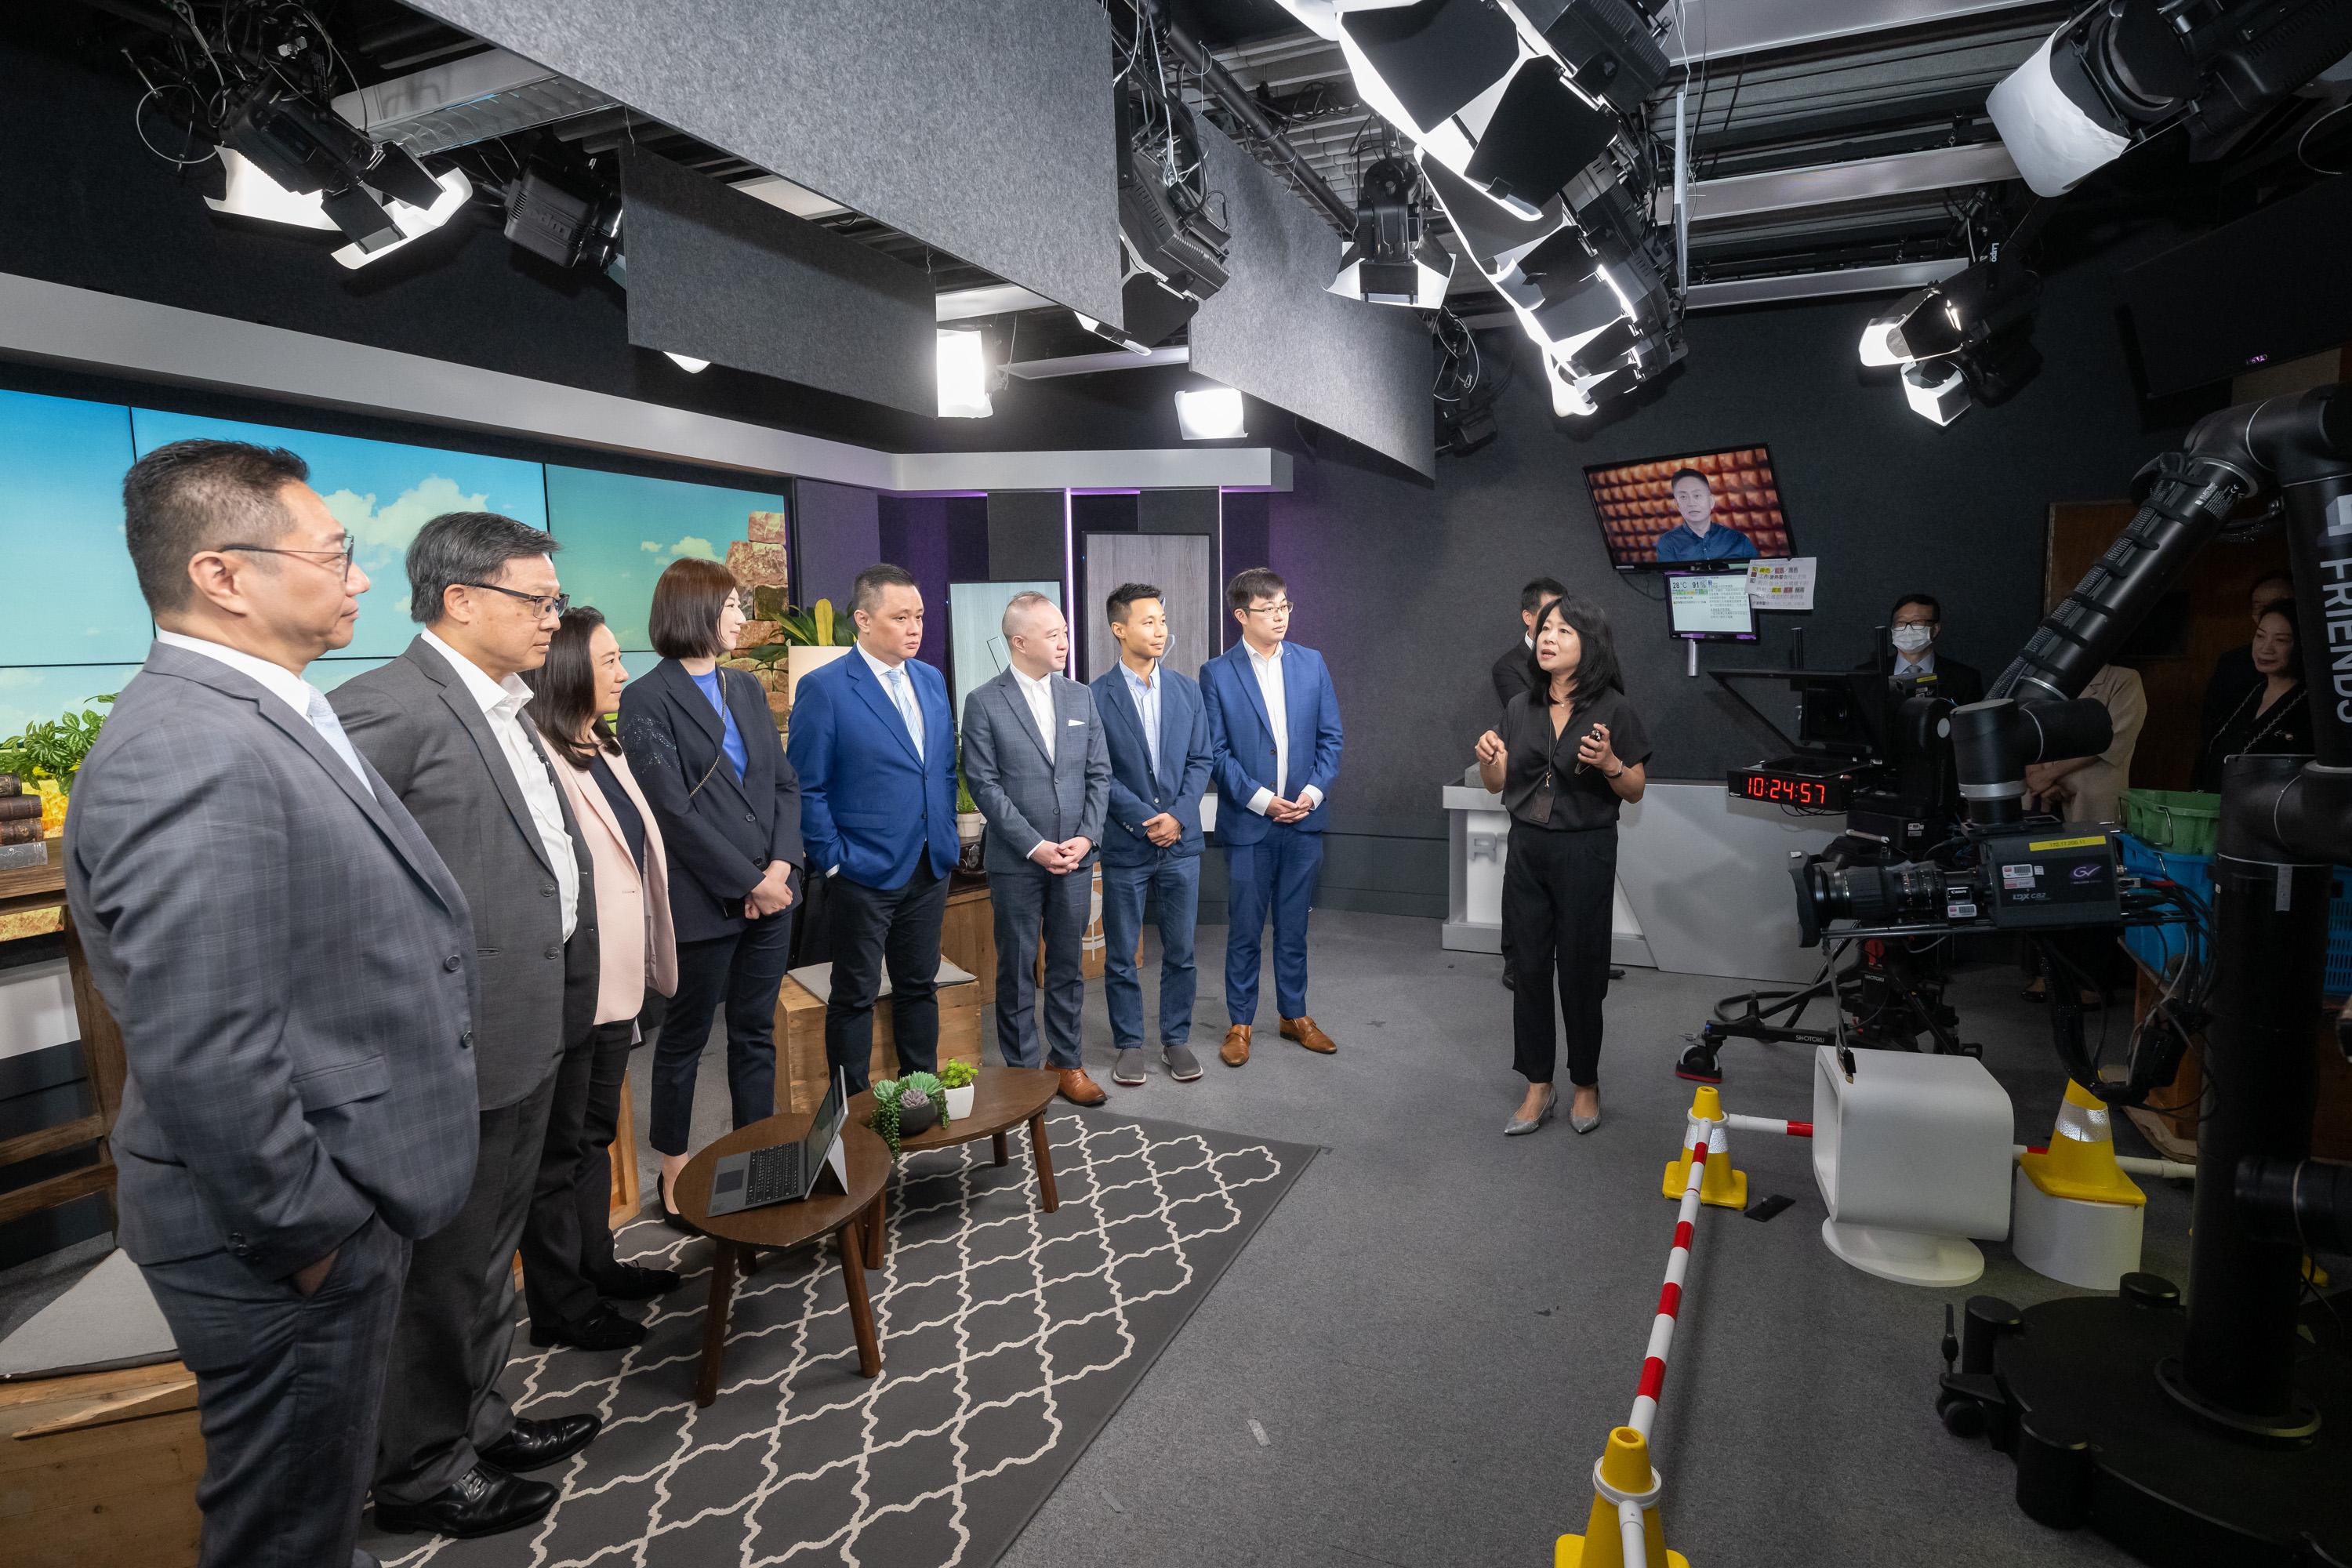 The Legislative Council (LegCo) Panel on Information Technology and Broadcasting visits Radio Television Hong Kong today (June 16) to enhance Members' understanding of the work of the public service broadcaster. Photo shows the Chairman of the Panel, Dr Junius Ho (second left), and other LegCo Members visiting a radio production studio equipped to broadcast on TV at Broadcasting House.